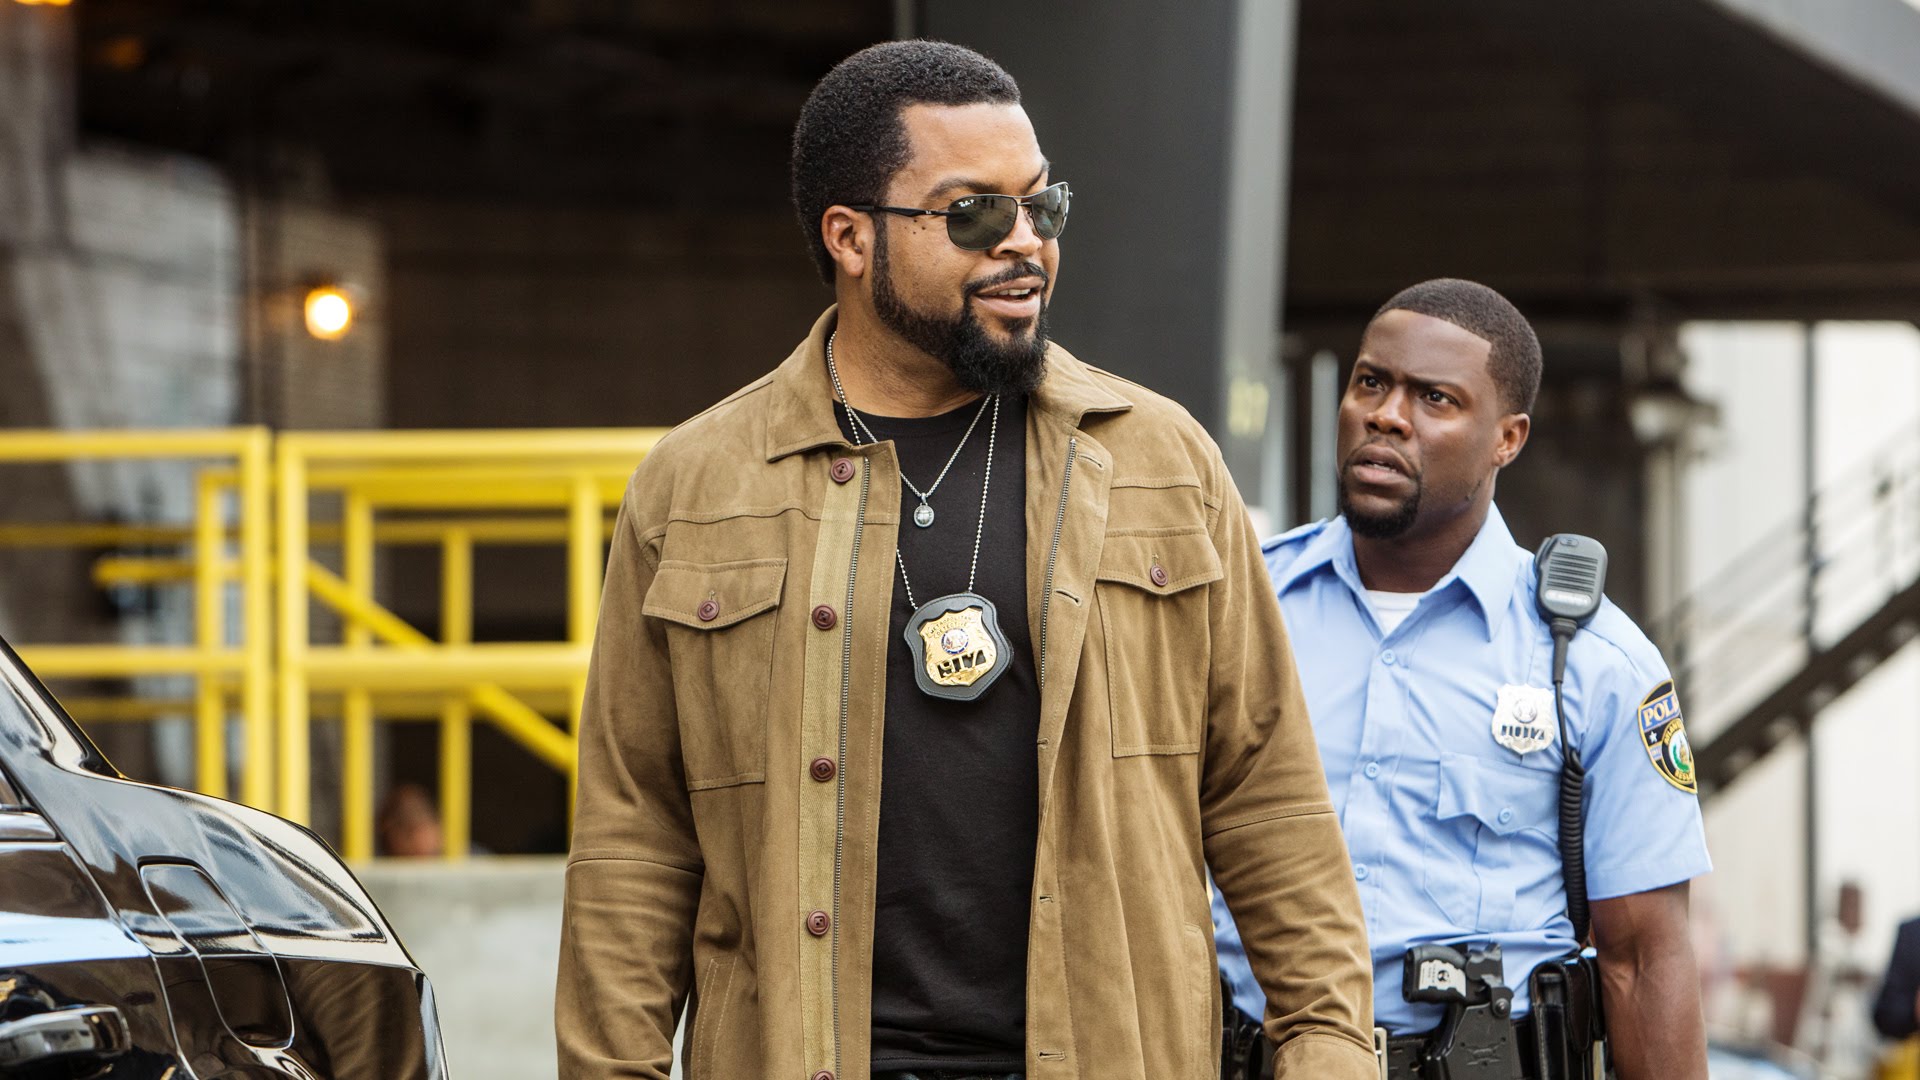 Cop Ice Cube Celebrity Kevin Hart Police Ride Along 2 1920x1080